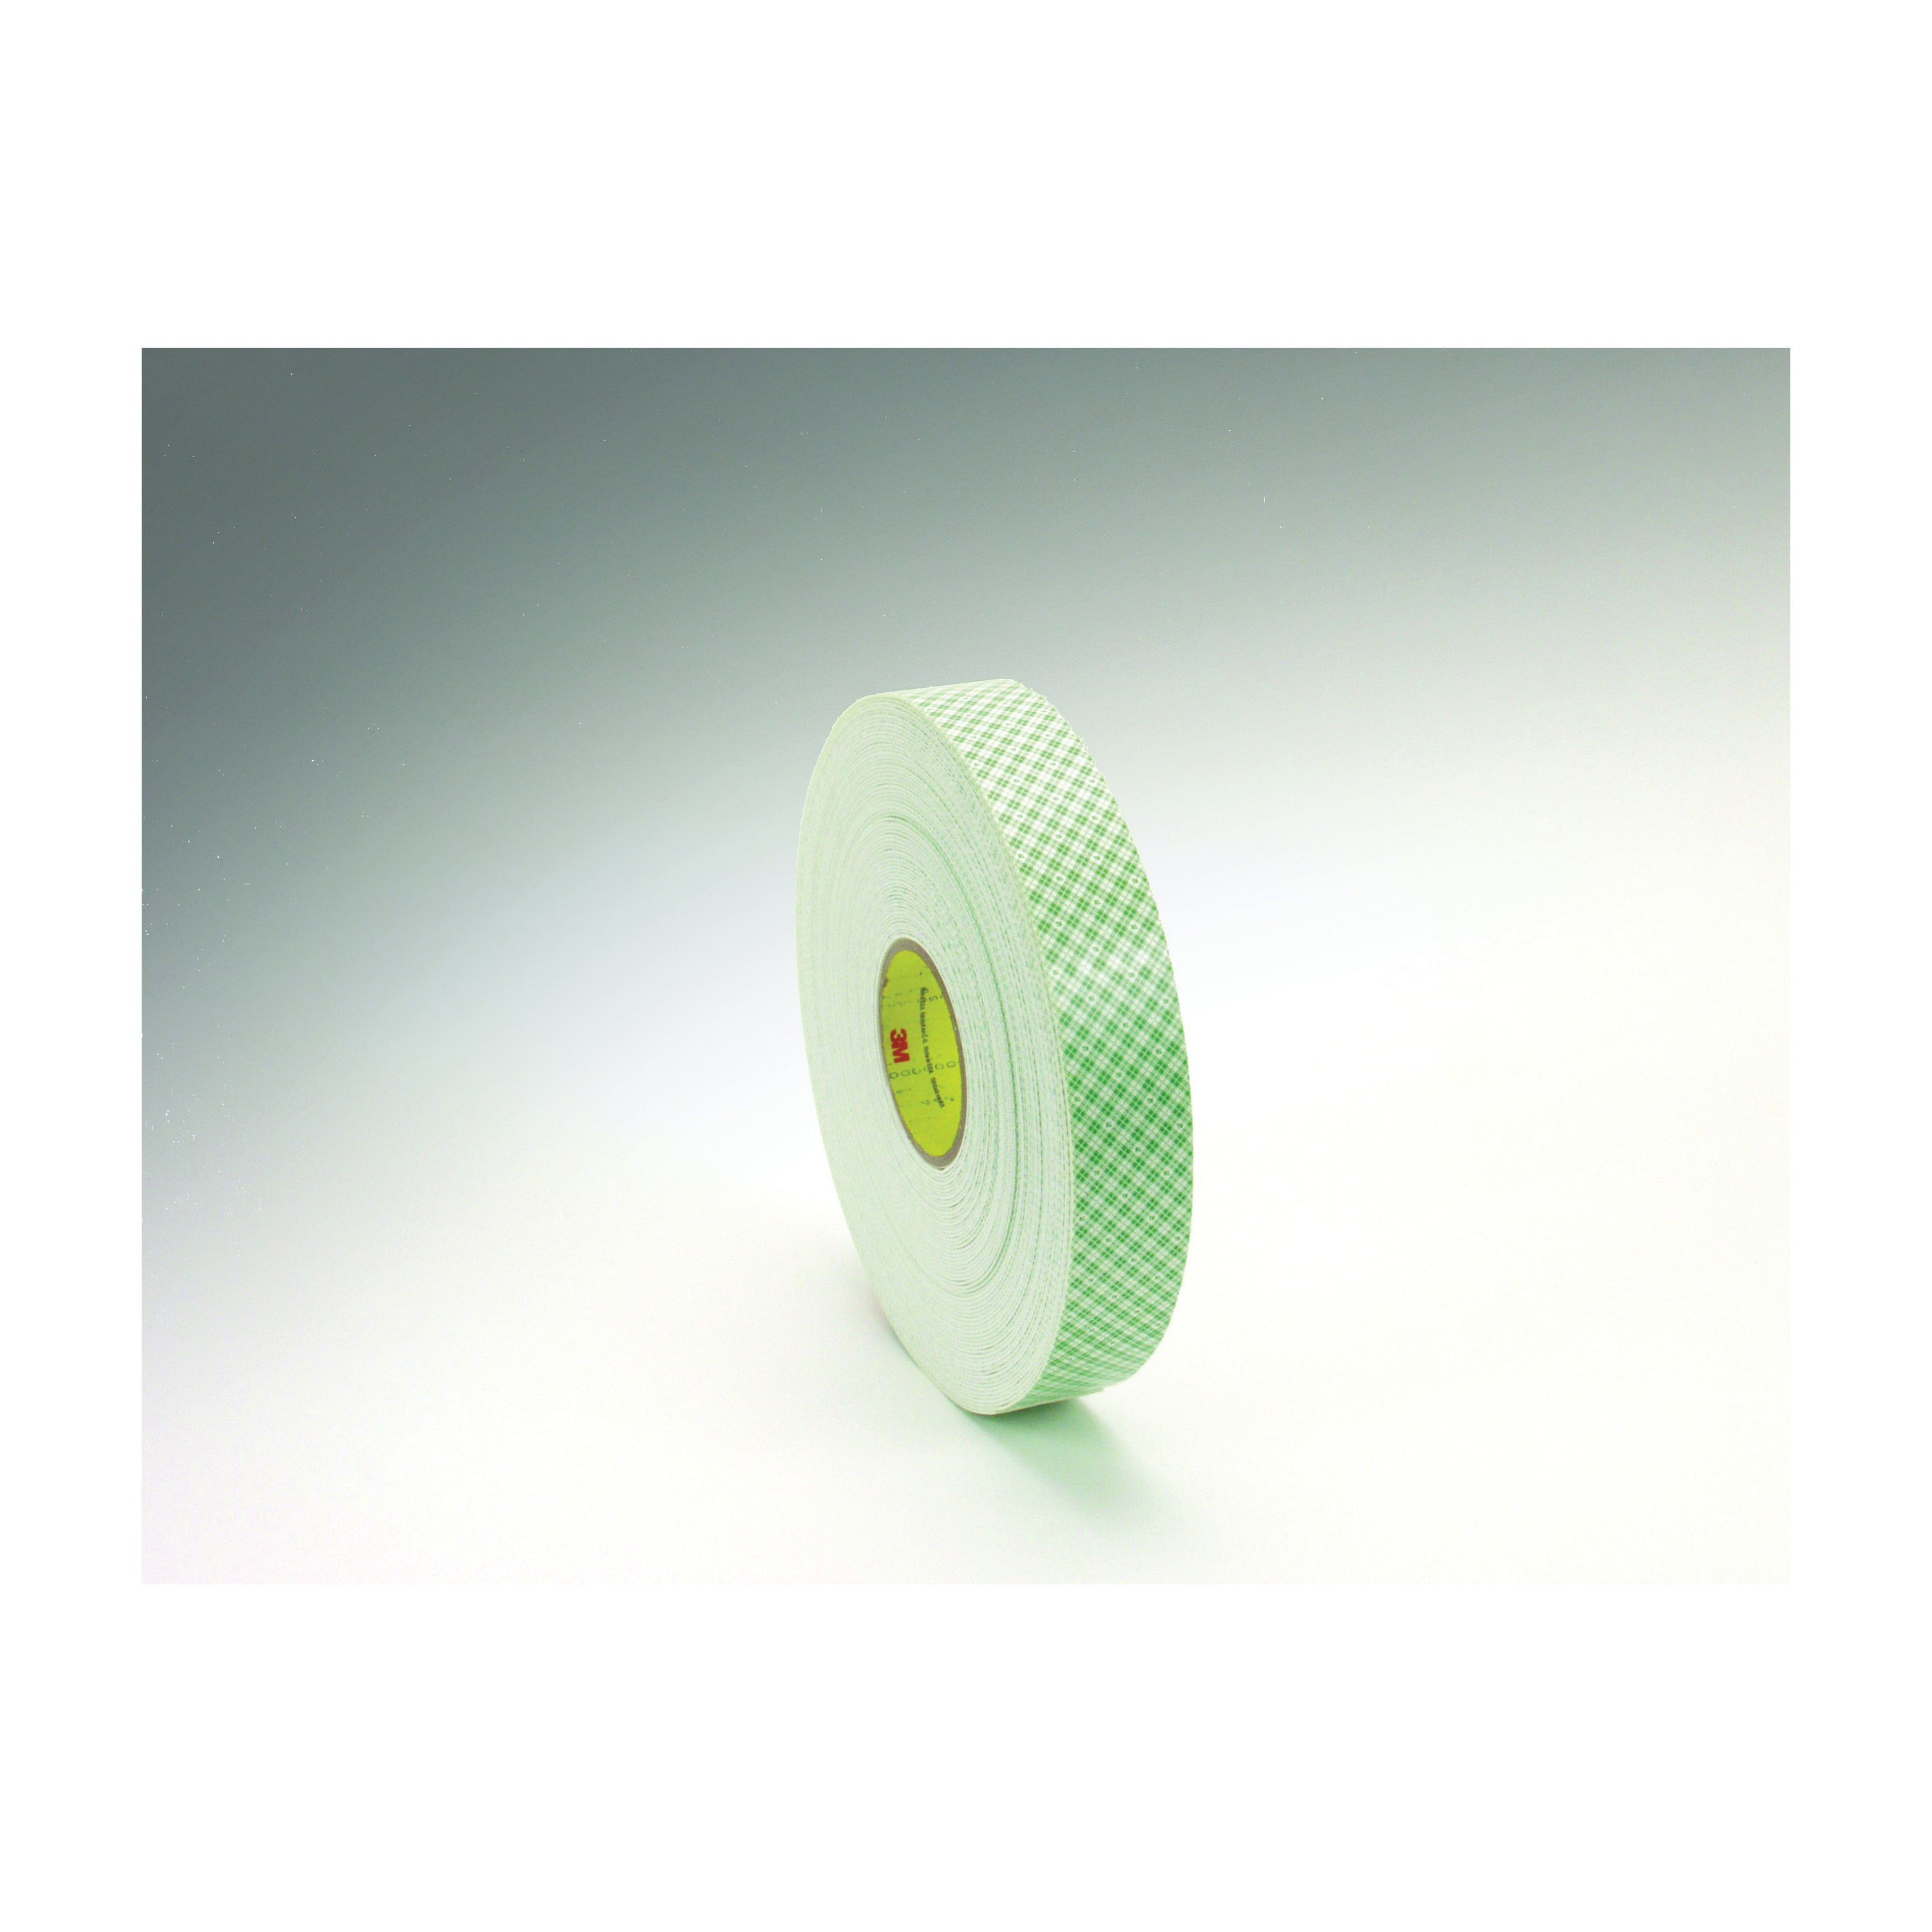 3M™ 021200-03371 Double Coated Tape, 36 yd L x 1/4 in W, 62 mil THK, Acrylic Adhesive, Urethane Foam Backing, Off-White